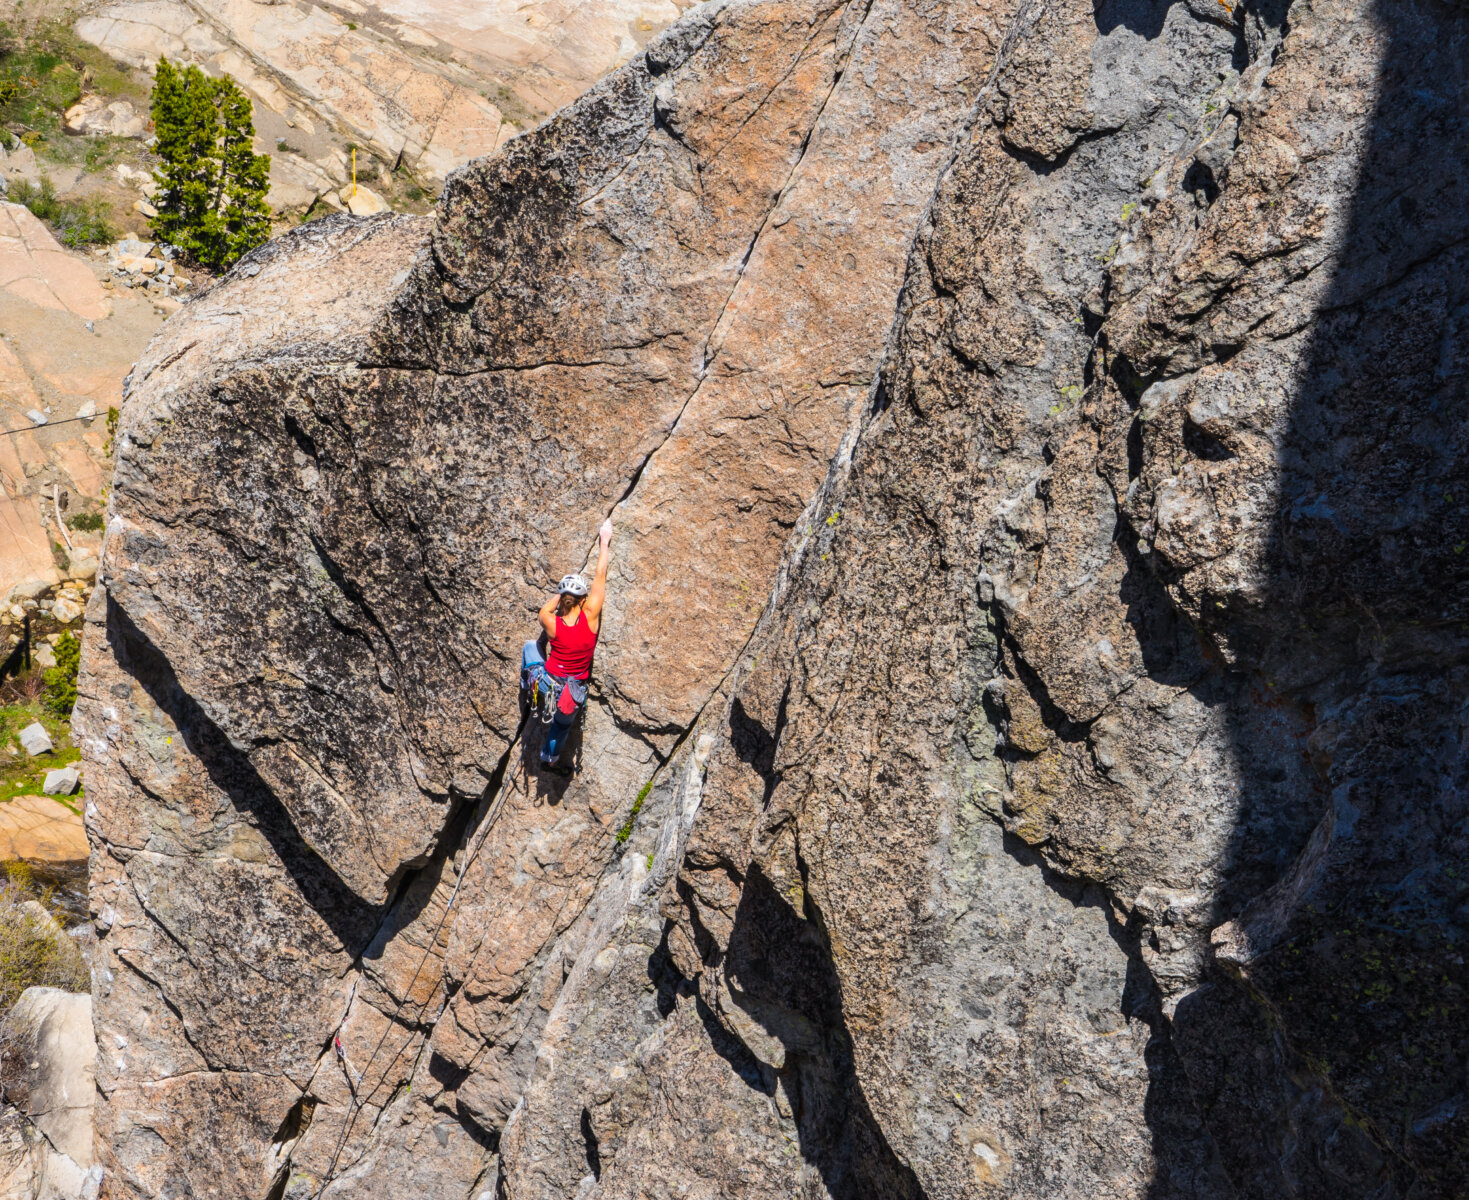 Learn to lead climb with guided rock climbing in Lake Tahoe with professional mountain guides